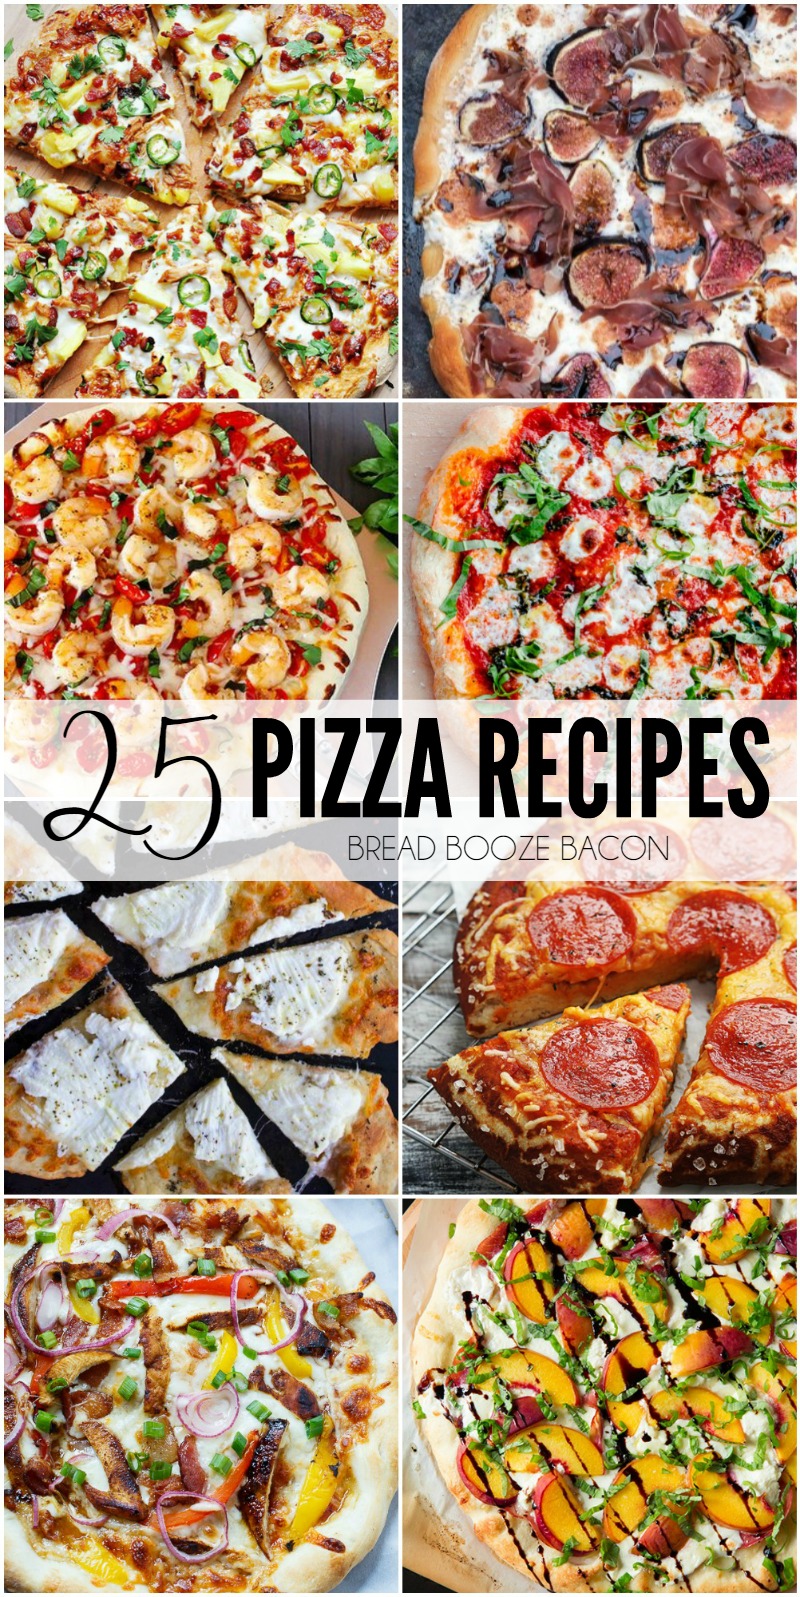 I swear I could live off of pizza. While I order out a fair amount, making a homemade pizza is always one of my favorite dinners. These 25 Pizza Recipes are oh so cheesy, and packed with incredible flavors that'll make you forget all about picking up the phone for takeout.